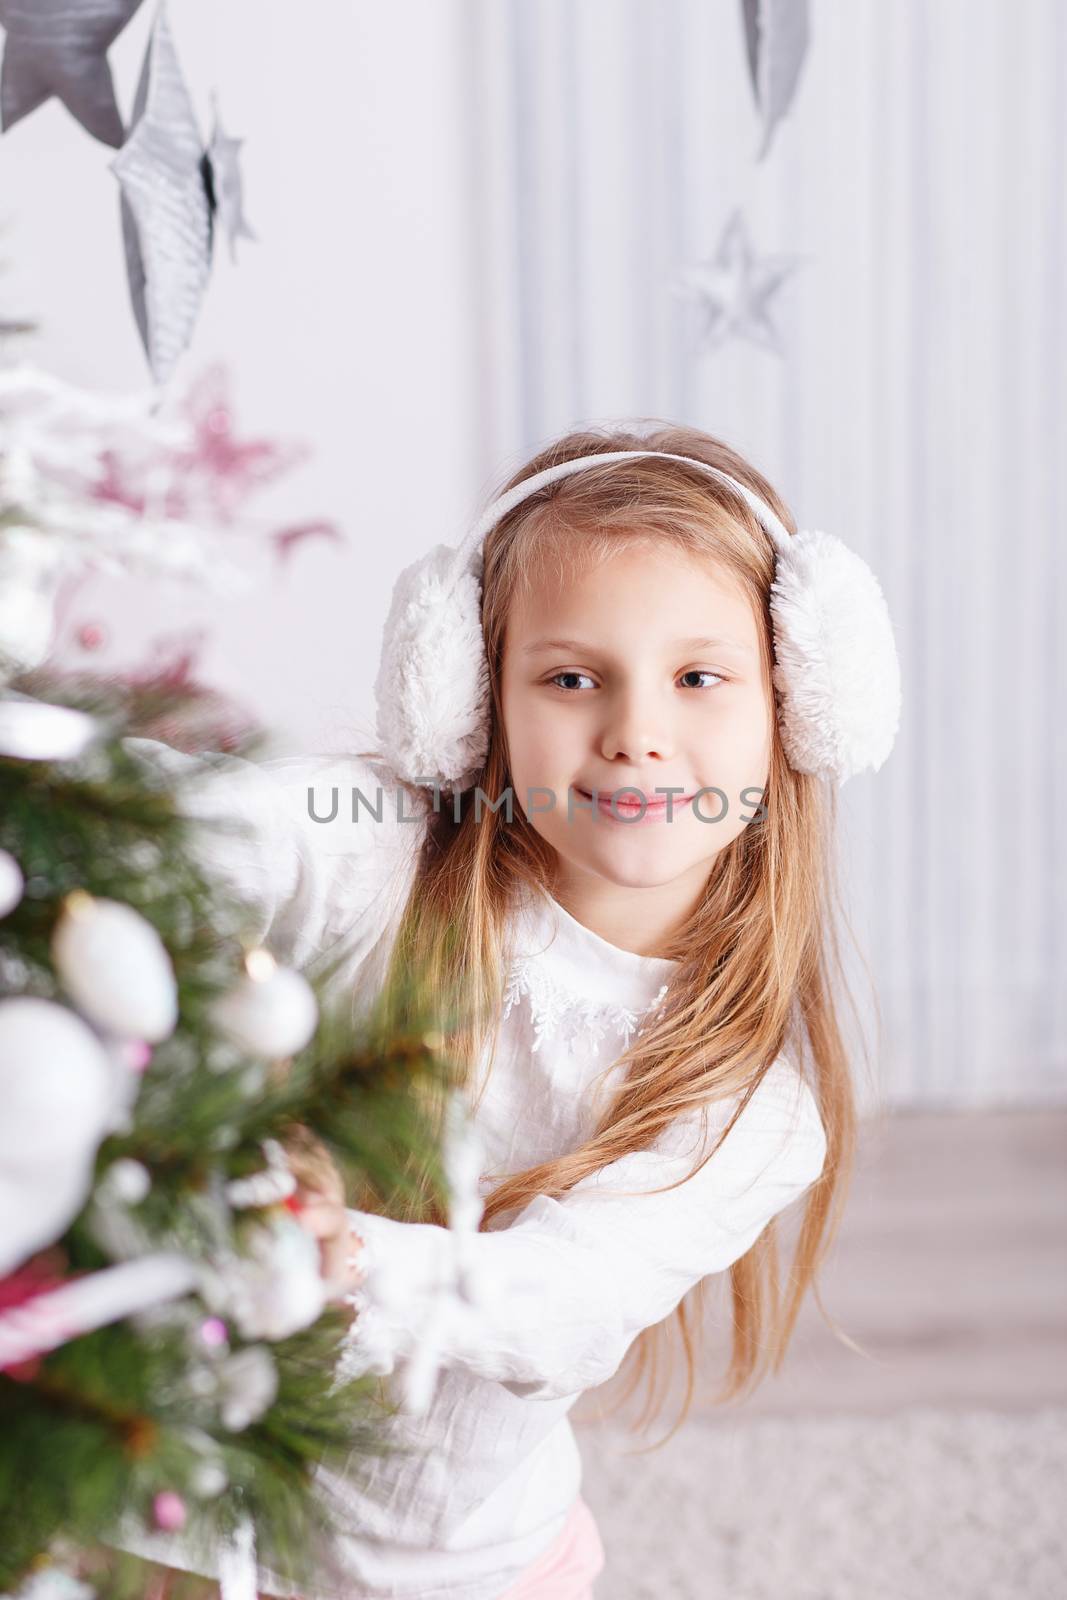 Beautiful little girl in earmuffs decorating Christmas tree with toys and balls. New year preparation.